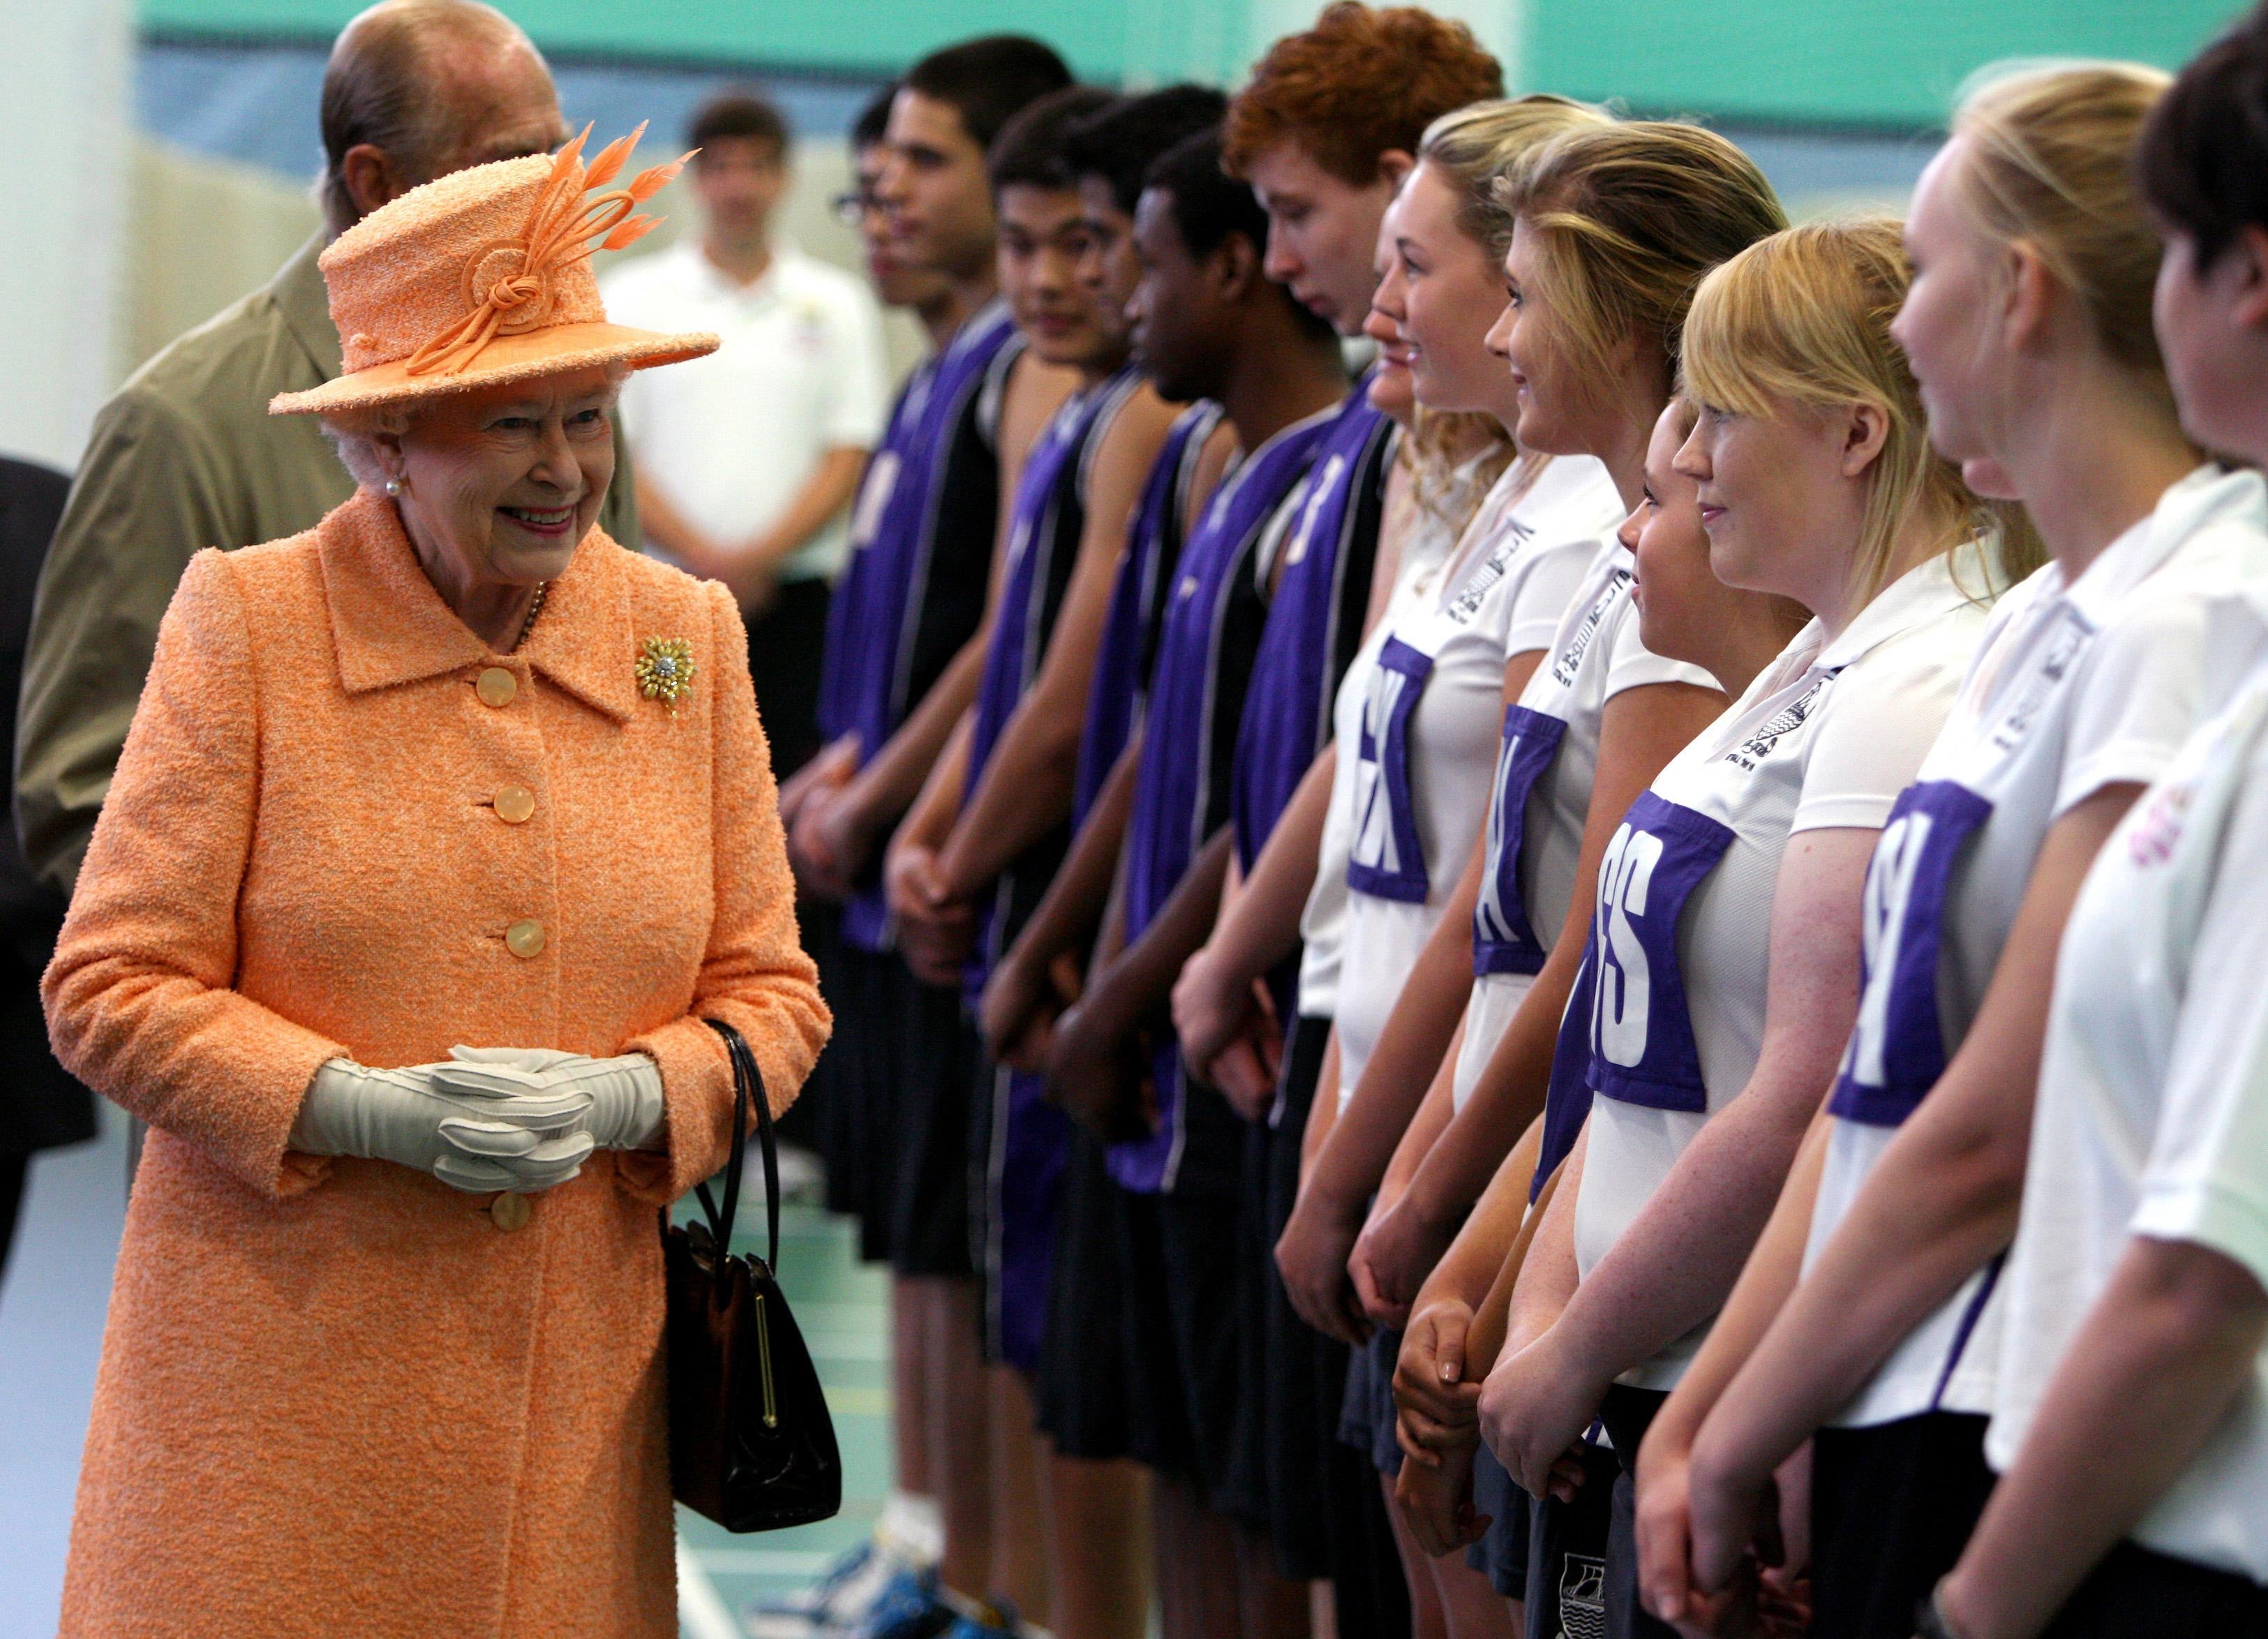 The Queen was a regular visitor at Gordonstoun (Andrew Milligan/PA)